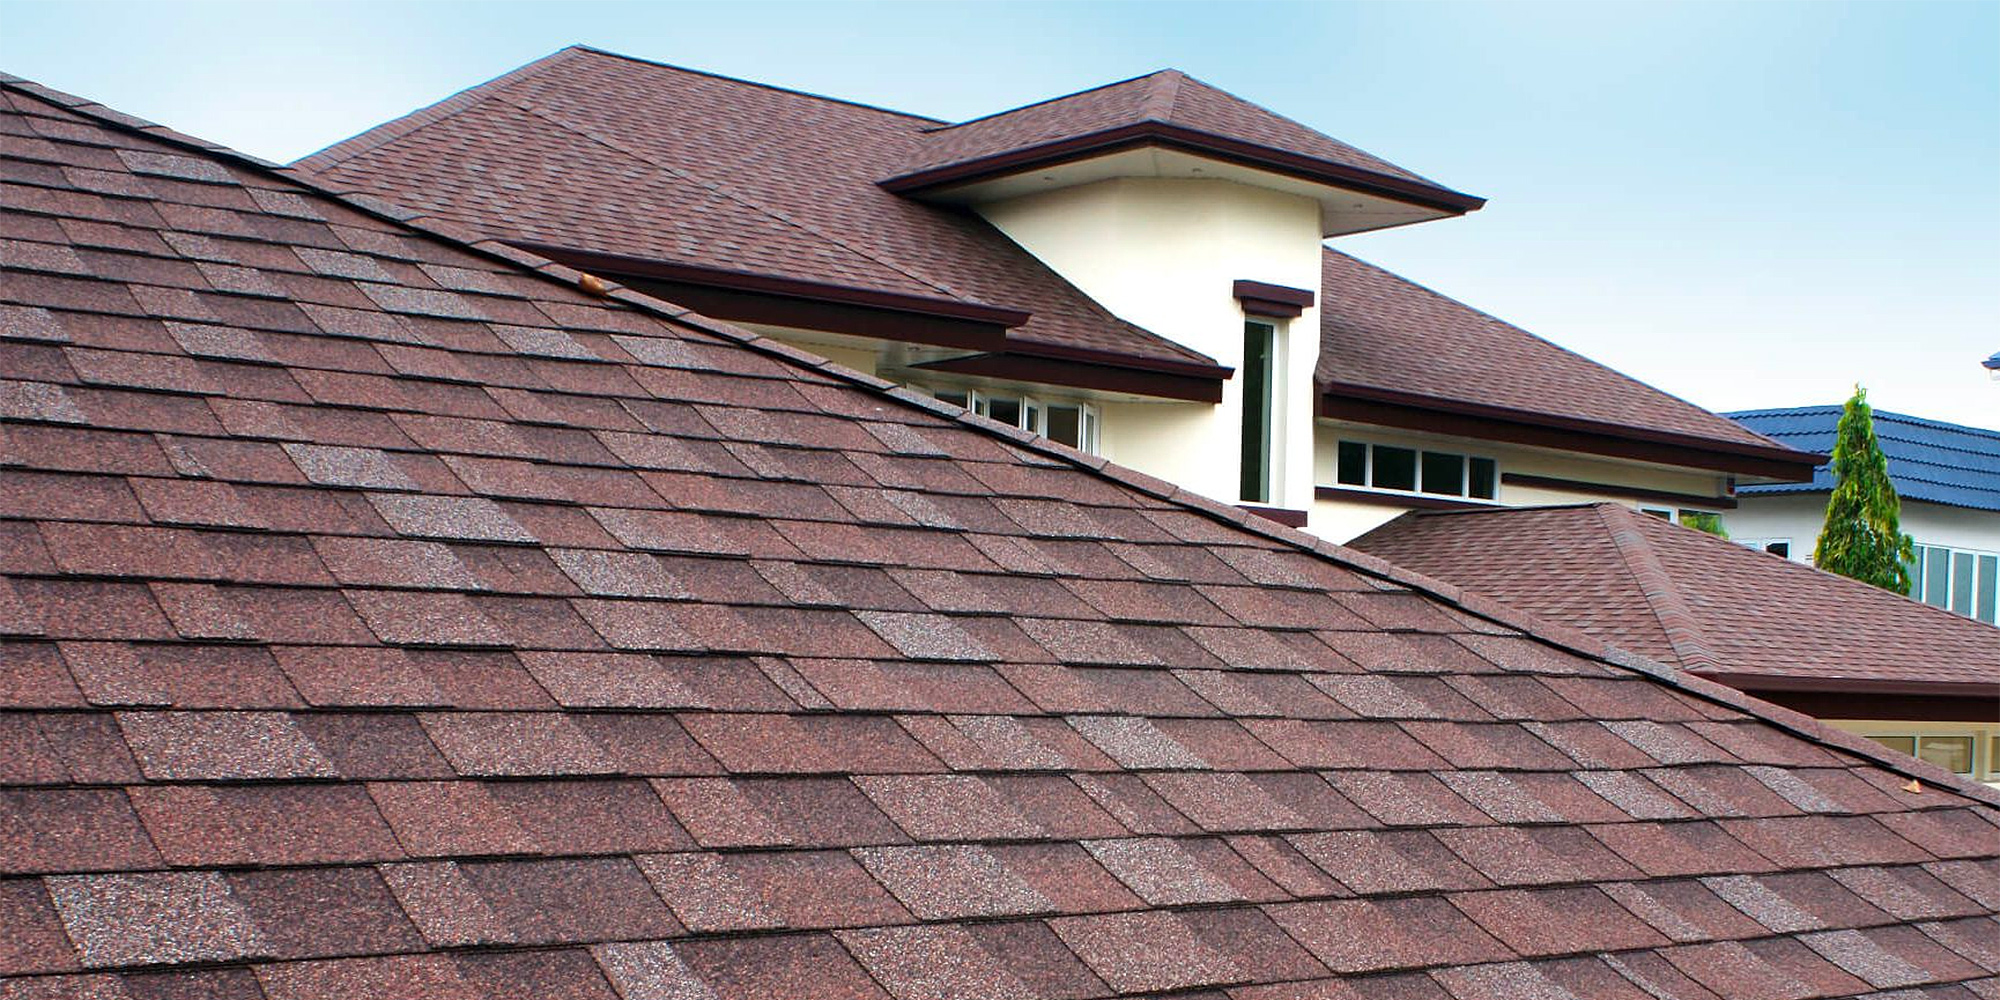 India Roofing Market Report, Company Profiles, Business Strategies, Key Trends and Forecast 2022-2027